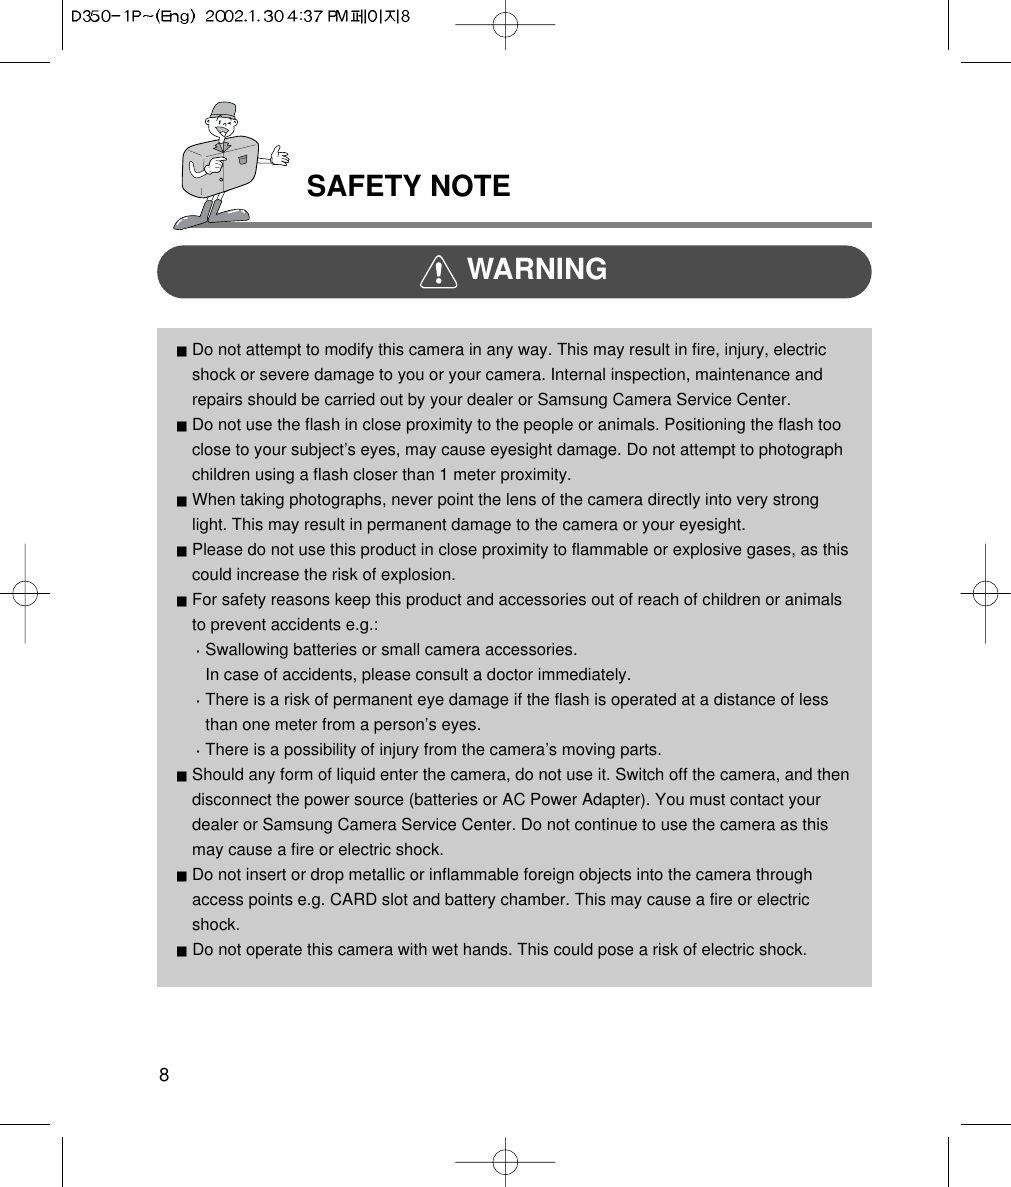 SAFETY NOTE8WARNINGDo not attempt to modify this camera in any way. This may result in fire, injury, electricshock or severe damage to you or your camera. Internal inspection, maintenance andrepairs should be carried out by your dealer or Samsung Camera Service Center.Do not use the flash in close proximity to the people or animals. Positioning the flash tooclose to your subject’s eyes, may cause eyesight damage. Do not attempt to photographchildren using a flash closer than 1 meter proximity.When taking photographs, never point the lens of the camera directly into very stronglight. This may result in permanent damage to the camera or your eyesight.Please do not use this product in close proximity to flammable or explosive gases, as thiscould increase the risk of explosion.For safety reasons keep this product and accessories out of reach of children or animalsto prevent accidents e.g.:Swallowing batteries or small camera accessories.In case of accidents, please consult a doctor immediately. There is a risk of permanent eye damage if the flash is operated at a distance of lessthan one meter from a person’s eyes.There is a possibility of injury from the camera’s moving parts.Should any form of liquid enter the camera, do not use it. Switch off the camera, and thendisconnect the power source (batteries or AC Power Adapter). You must contact yourdealer or Samsung Camera Service Center. Do not continue to use the camera as thismay cause a fire or electric shock.Do not insert or drop metallic or inflammable foreign objects into the camera throughaccess points e.g. CARD slot and battery chamber. This may cause a fire or electricshock.Do not operate this camera with wet hands. This could pose a risk of electric shock.